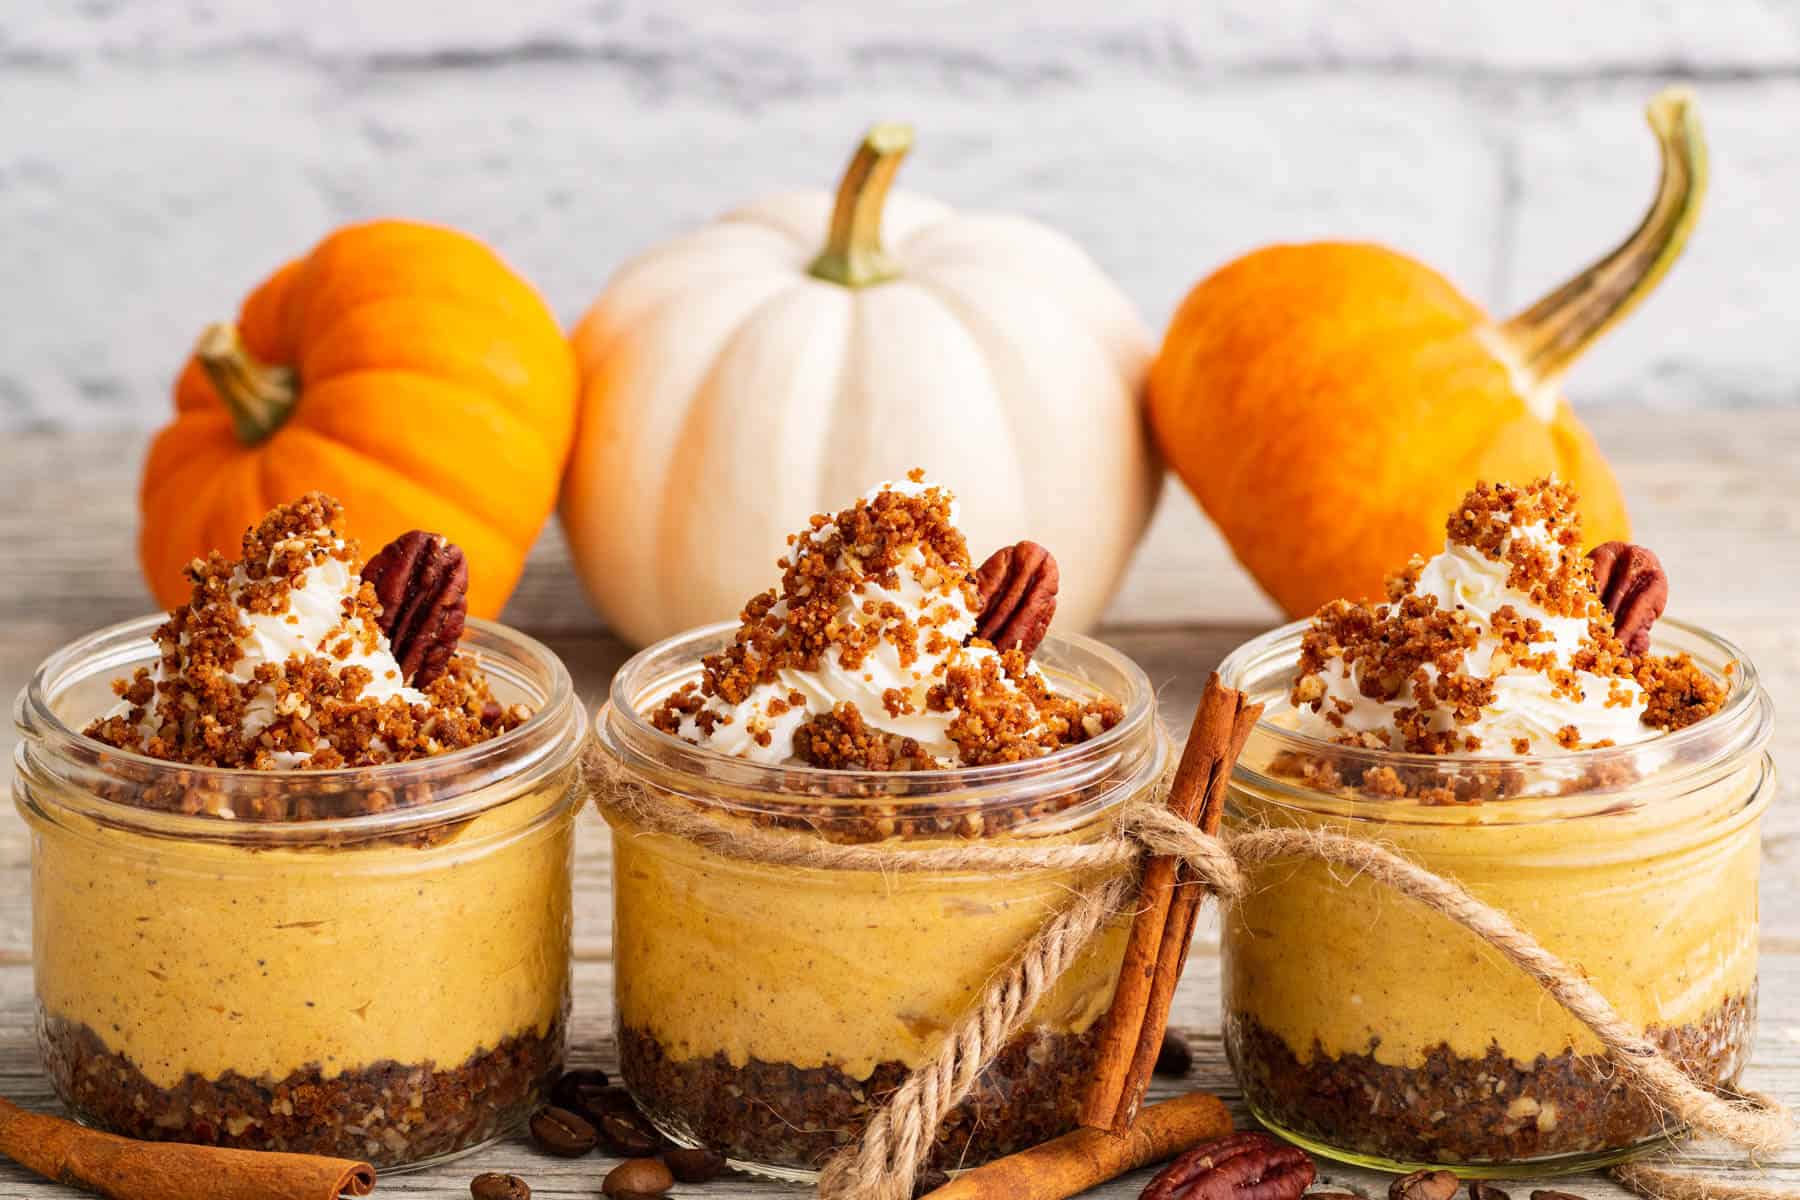 Three individually sized Pumpkin Delight desserts topped with gingersnap crumbs and pecans sit amongst decorative pumpkins.